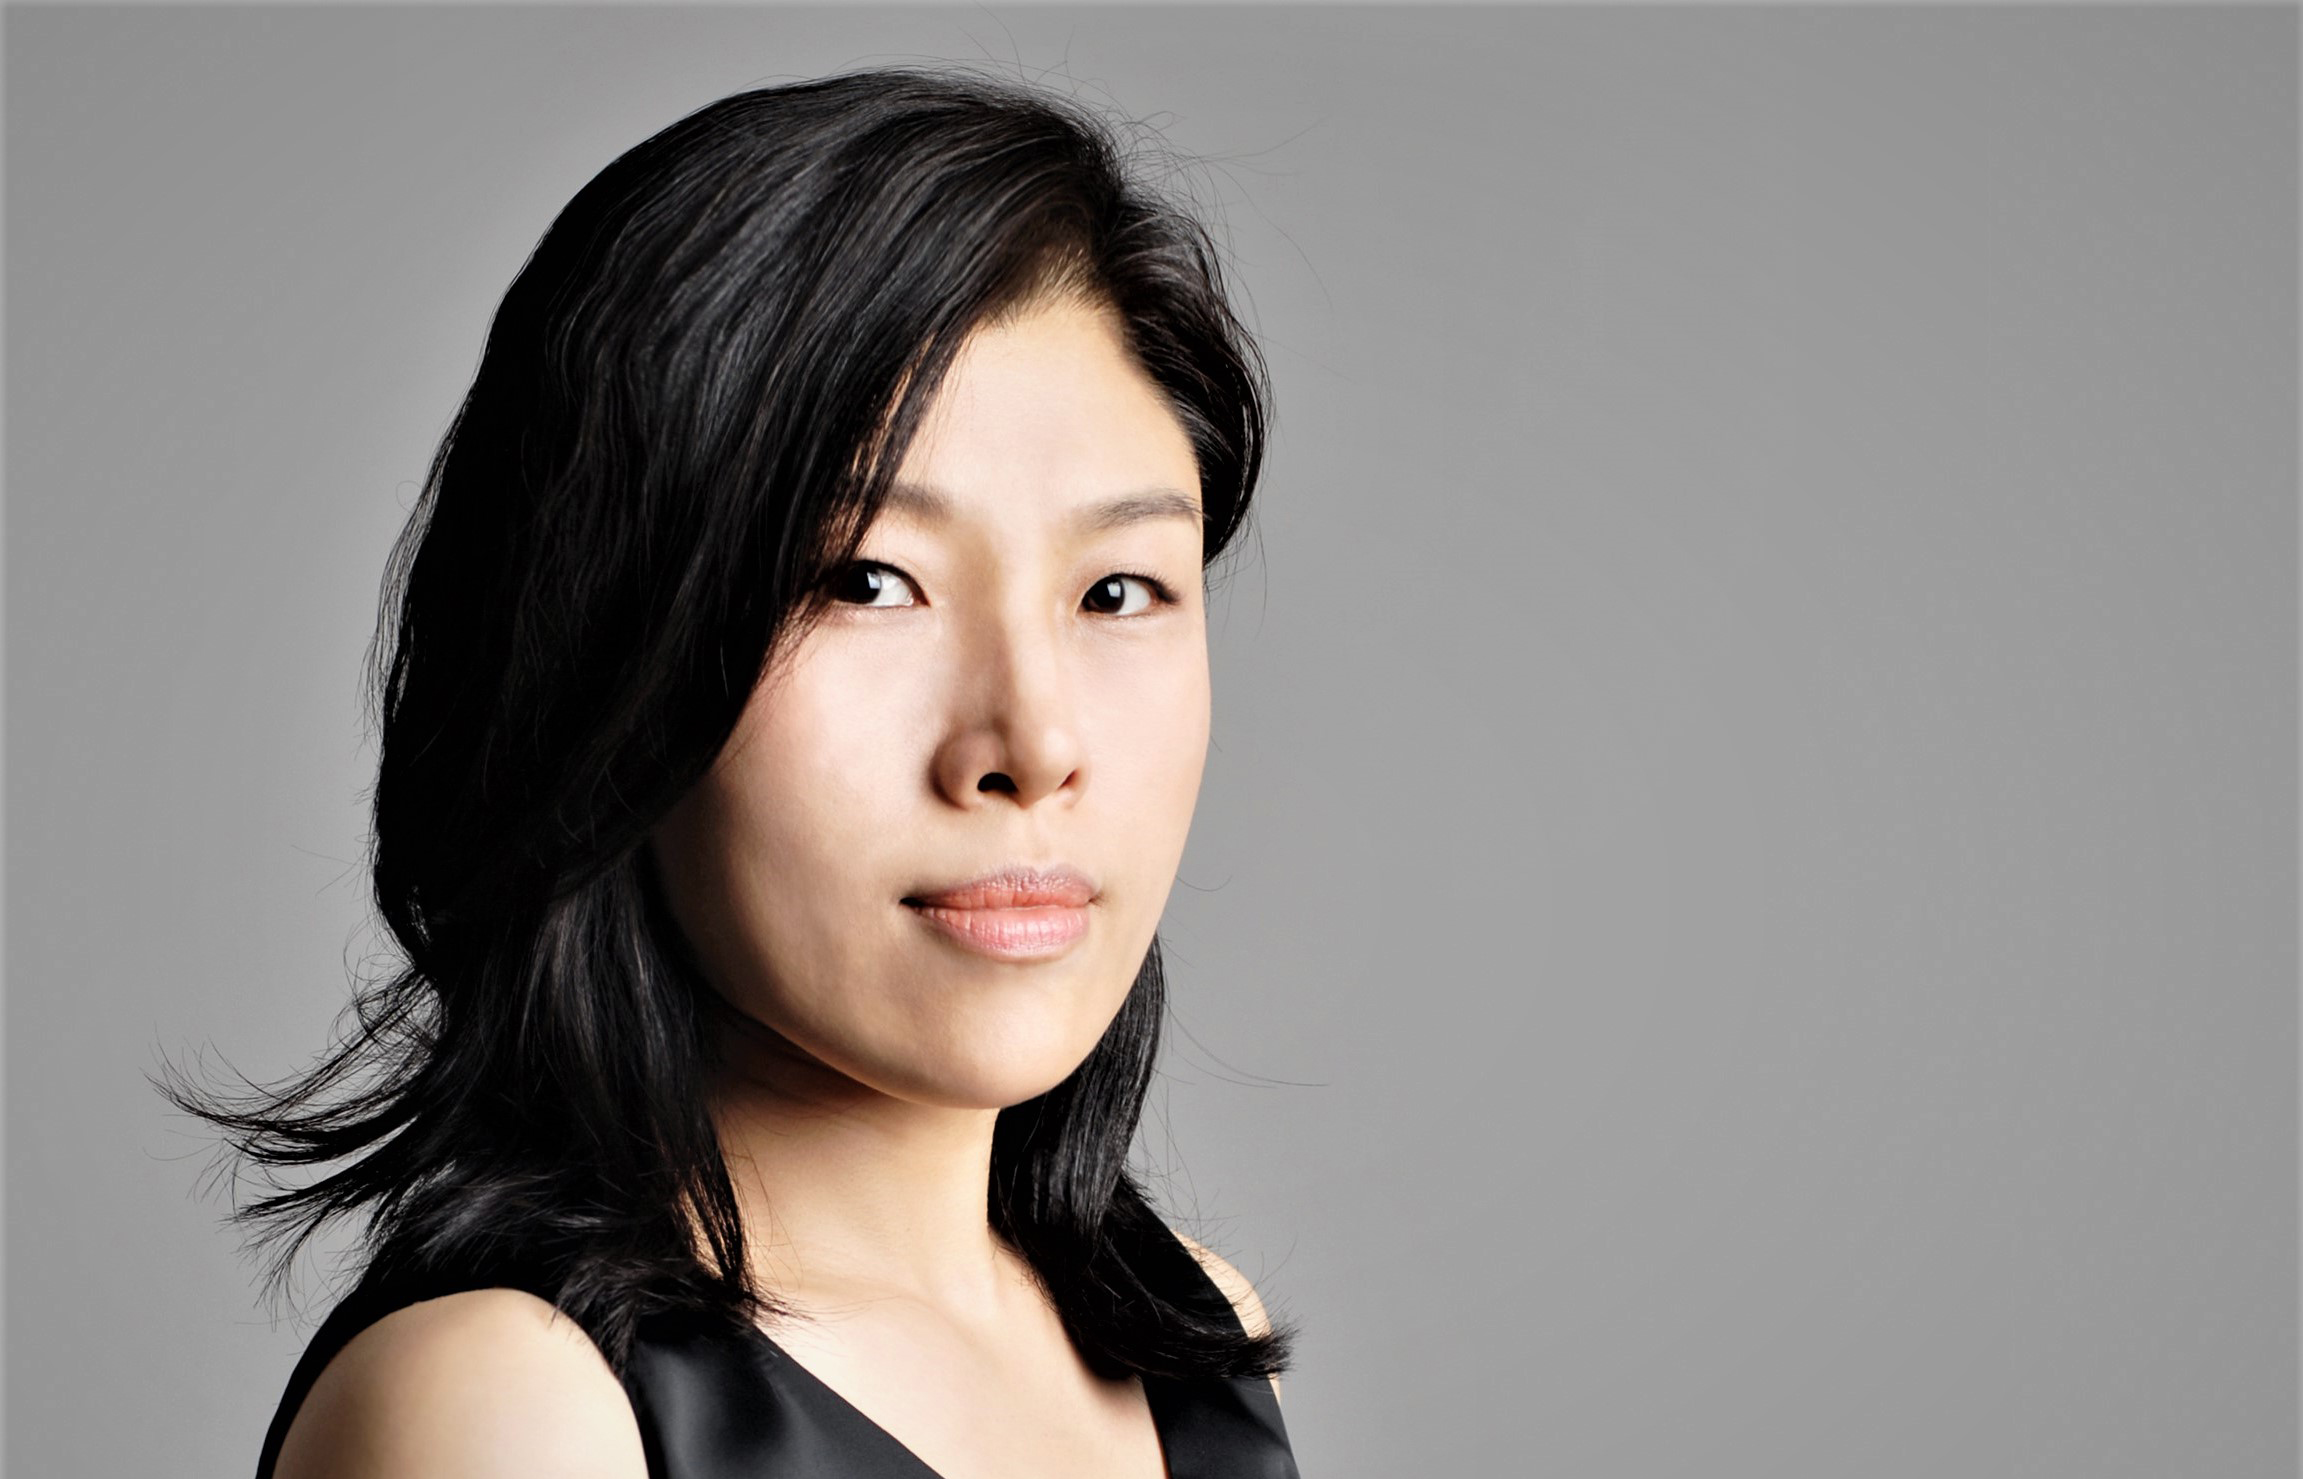 Ouachita to host world-renowned pianist Dr. Yoosun Kang in concert Oct. 3.